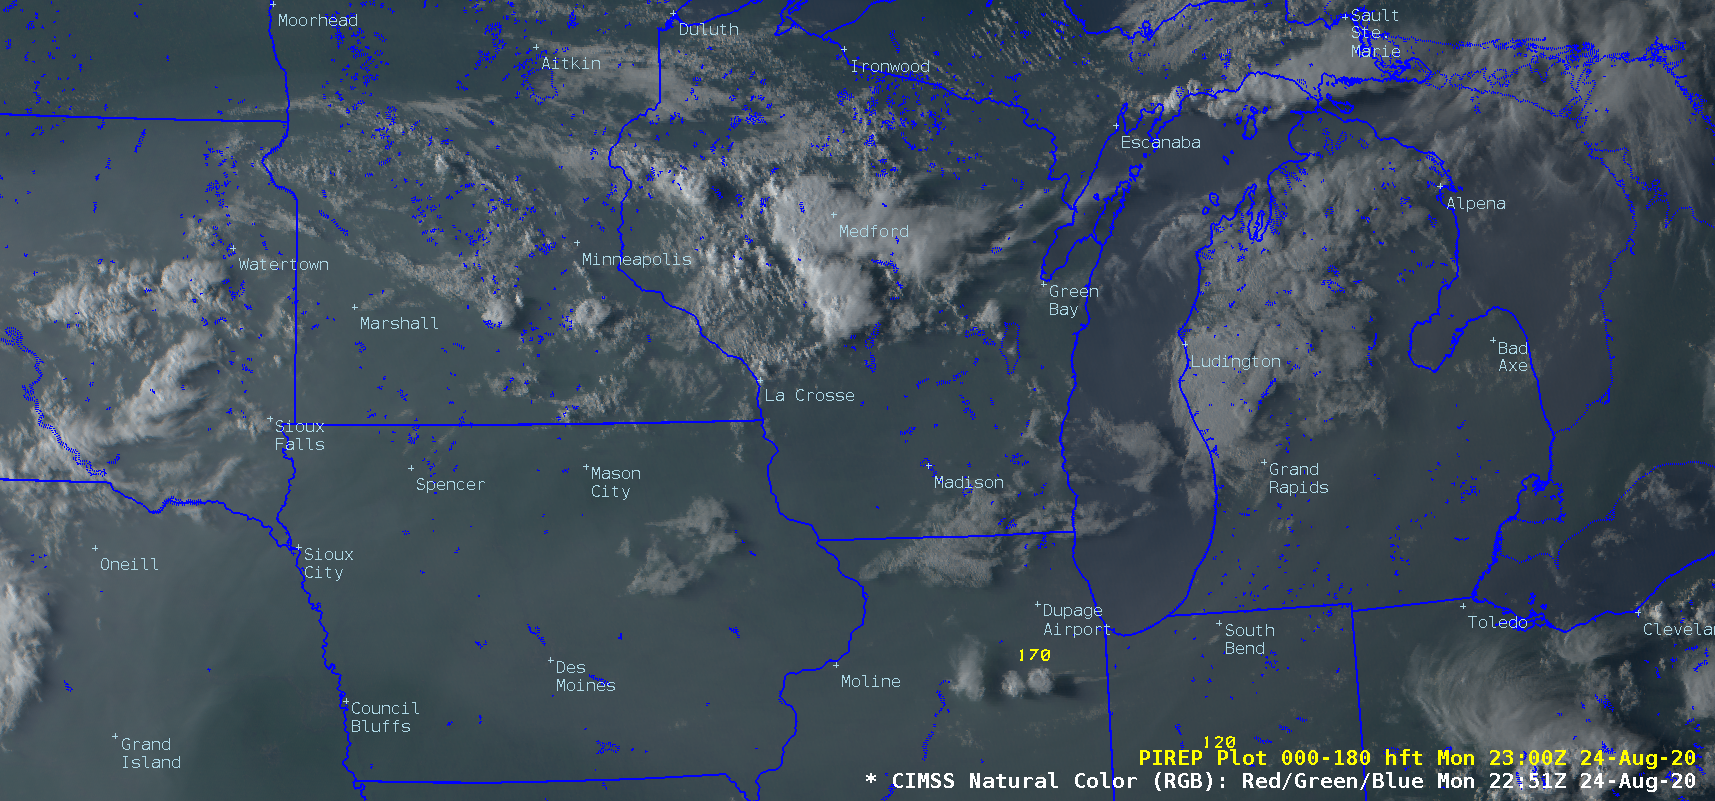 CIMSS Natural Color RGB images, with plots of Pilot Reports [click to play animation | MP4]